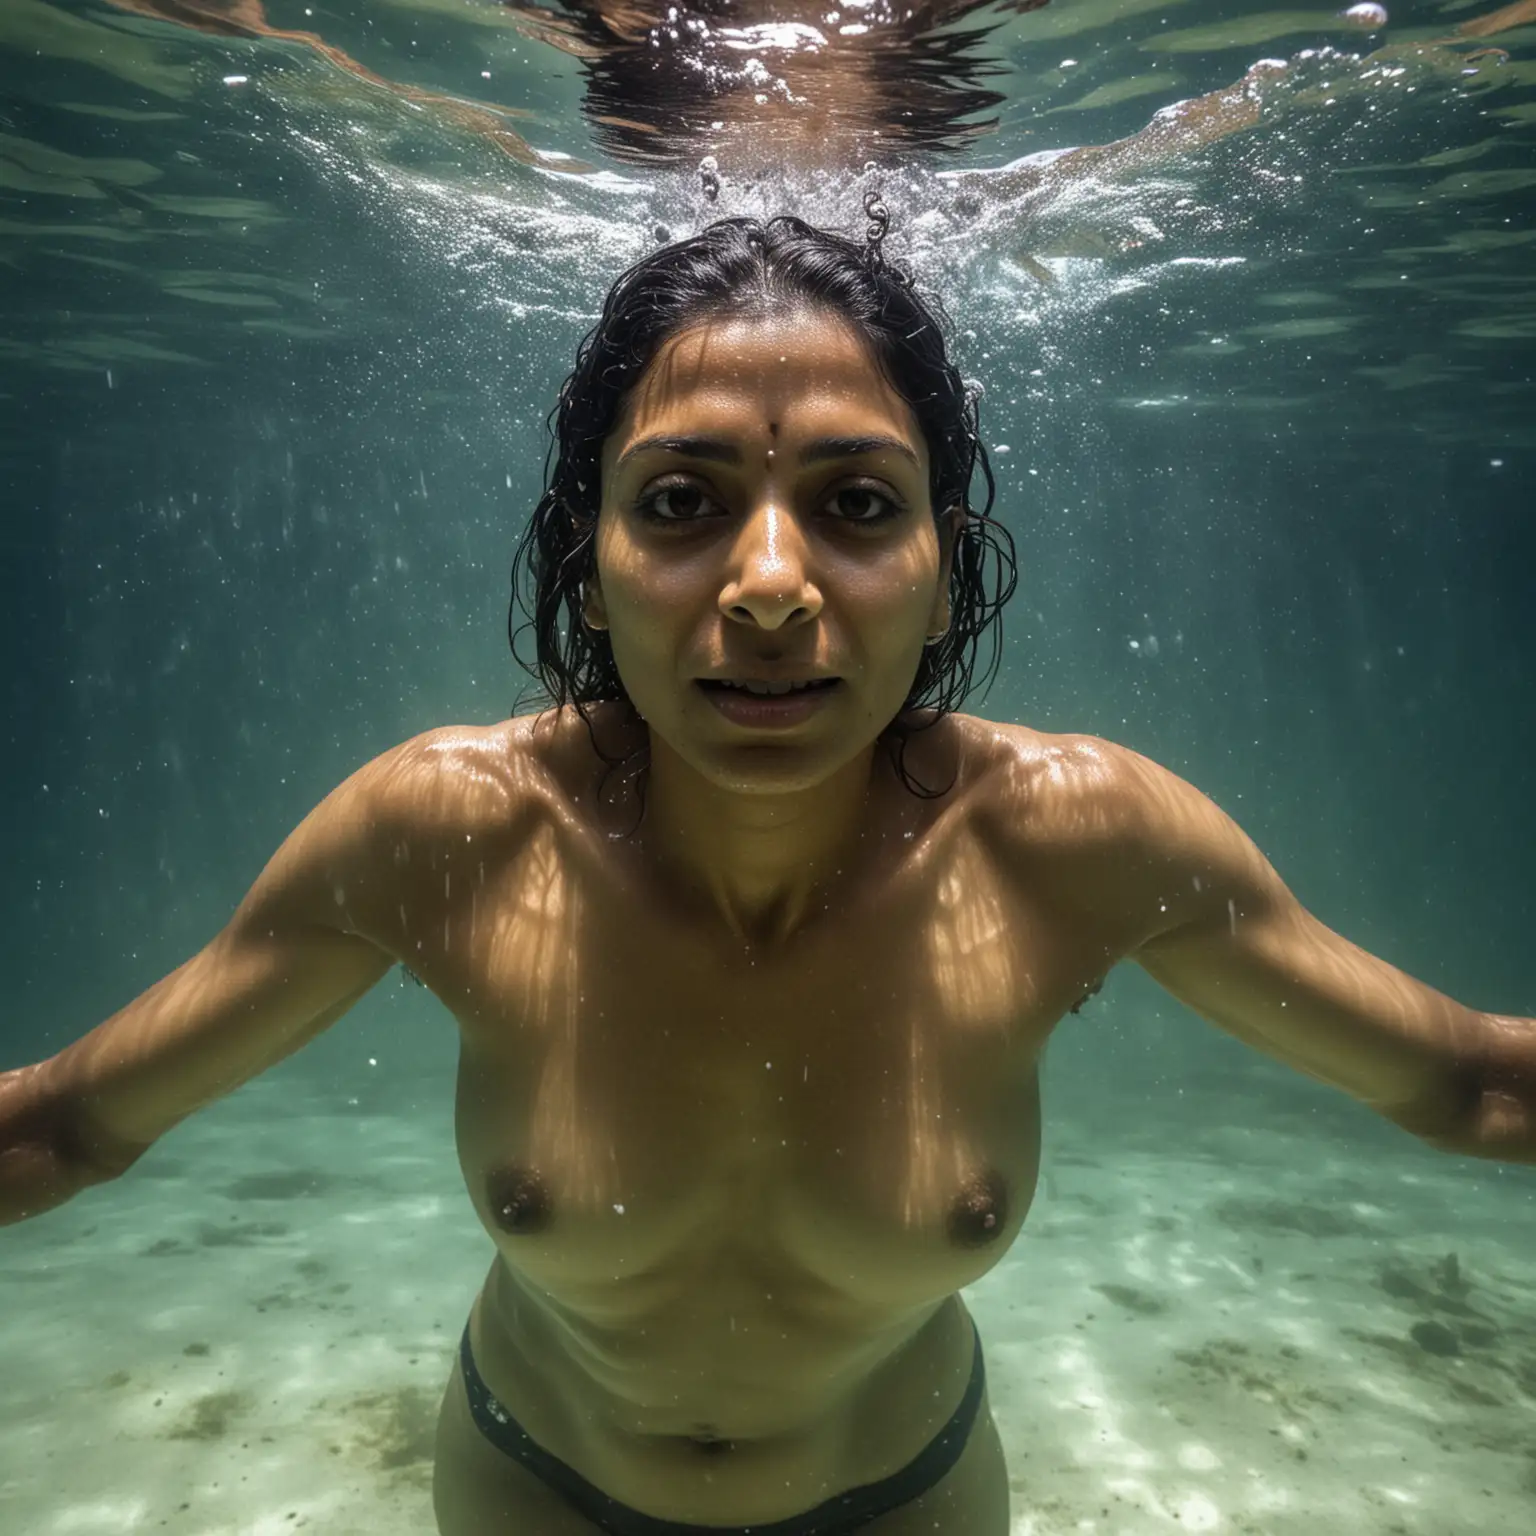 40 year old Indian woman, topless, under water, muscular